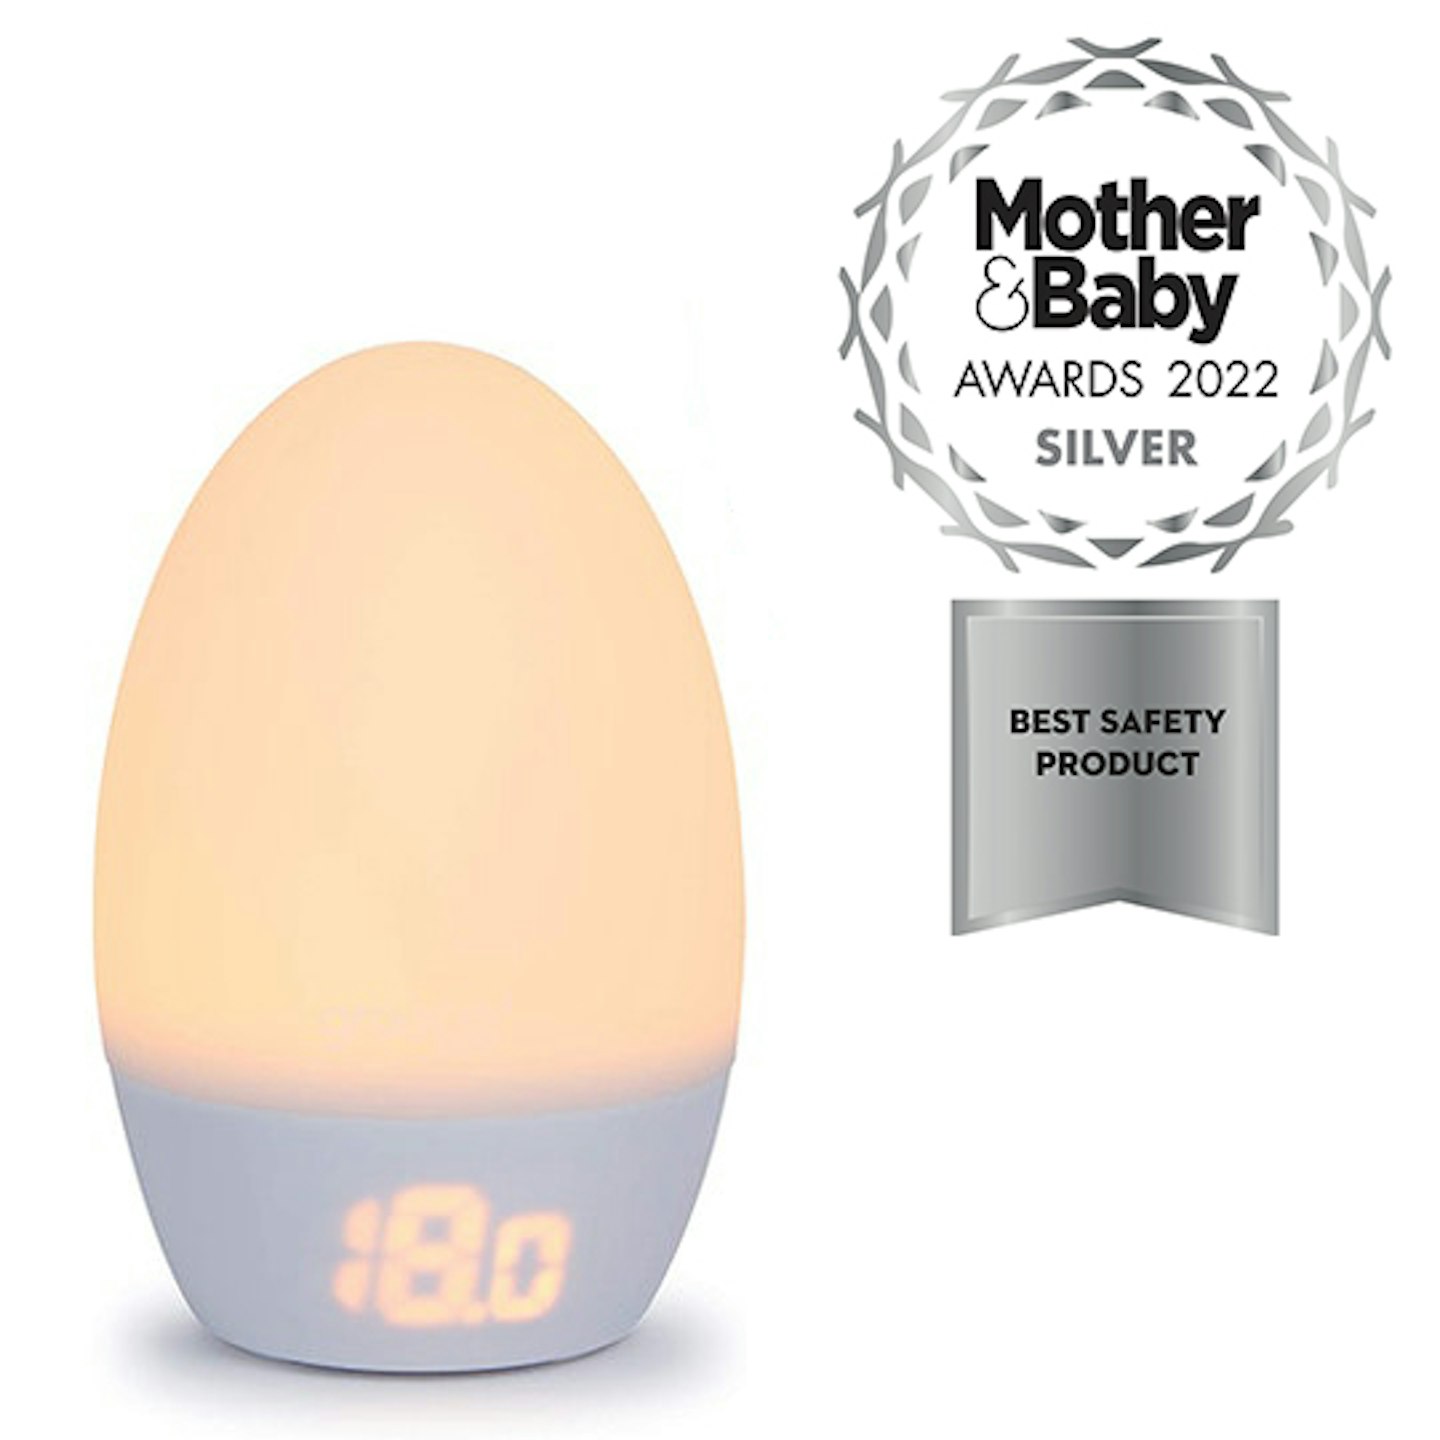 Tommee Tippee Groegg 2 Room Thermometer - Bella Baby, Award